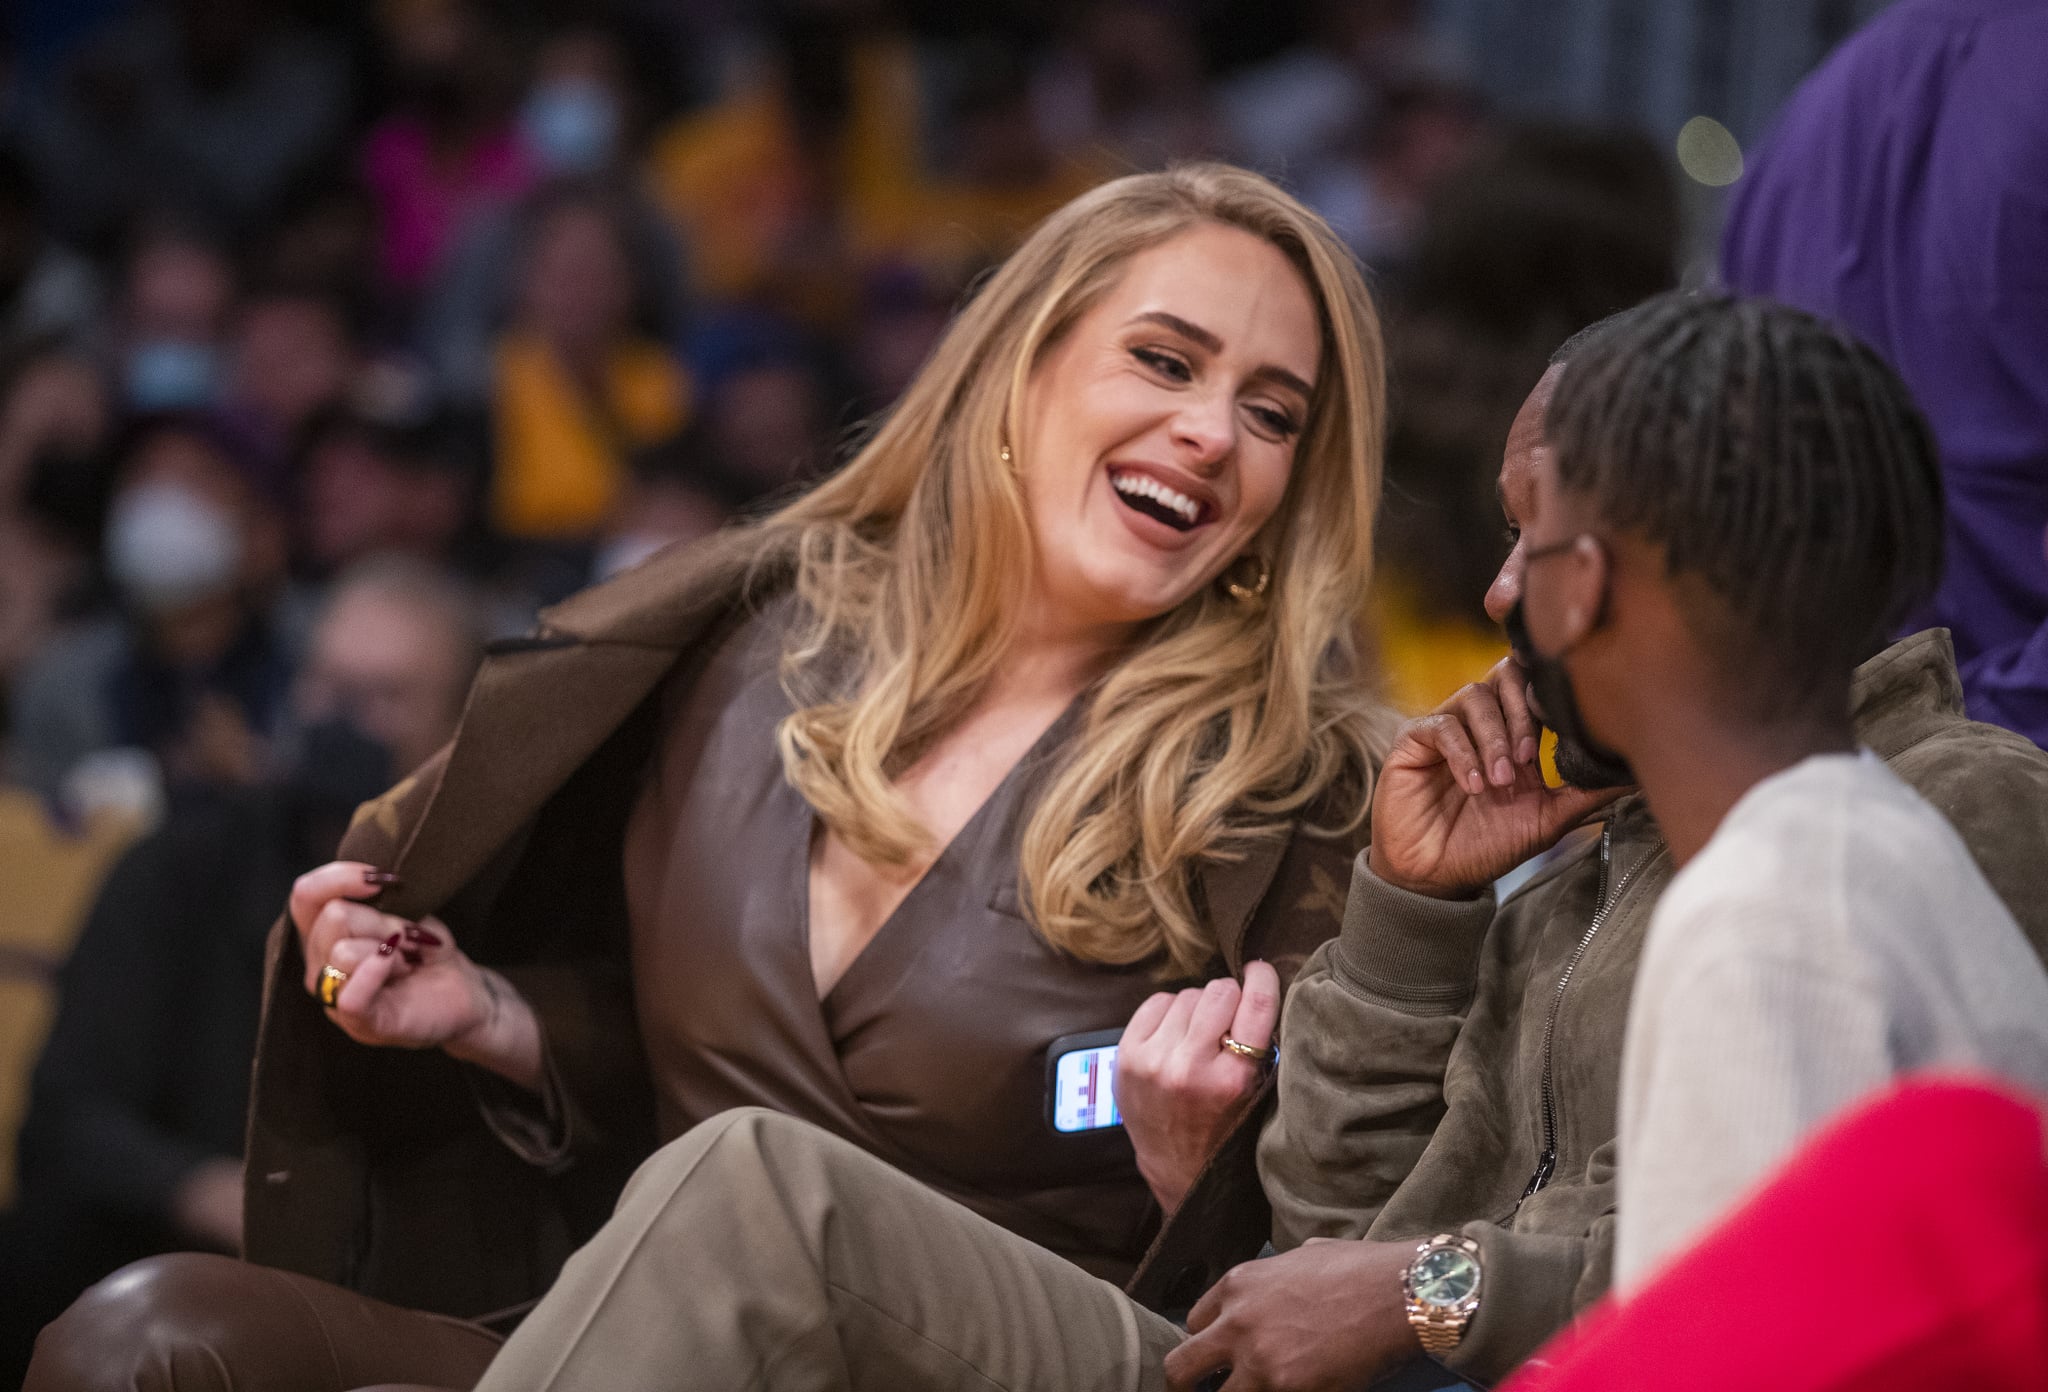 Los Angeles, CA - October 19: Singer Adele attends a game between the Golden State Warriors and the Los Angeles Lakers on October 19, 2021 at STAPLES Center in Los Angeles. (Allen J. Schaben / Los Angeles Times via Getty Images).